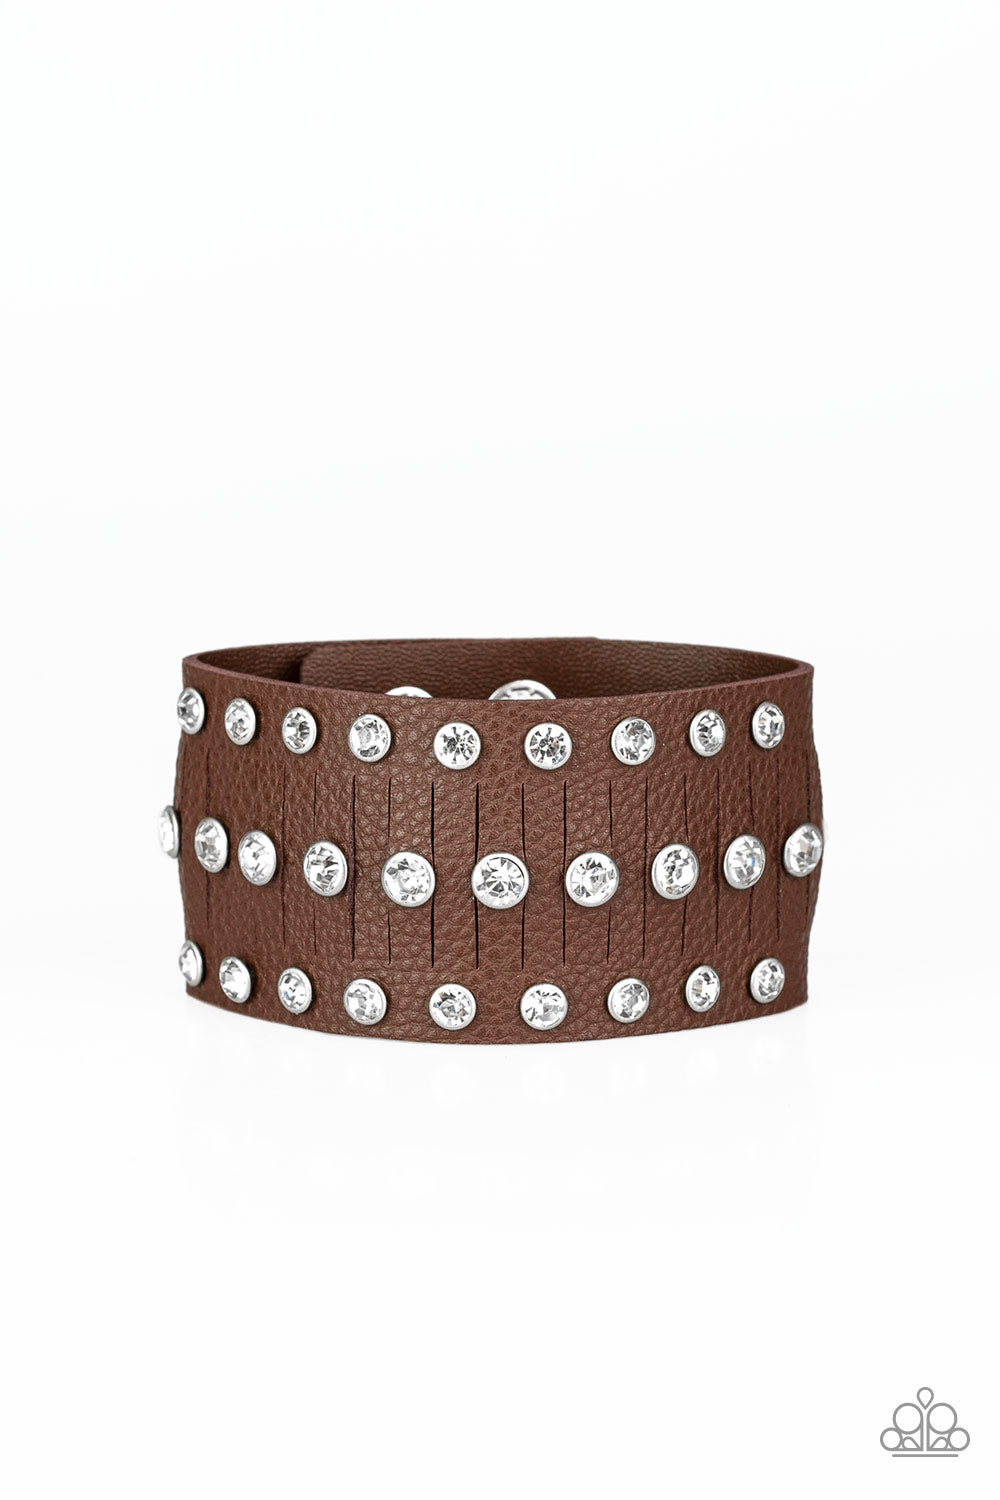 Now Taking The Stage Brown Paparazzi Bracelet Cashmere Pink Jewels